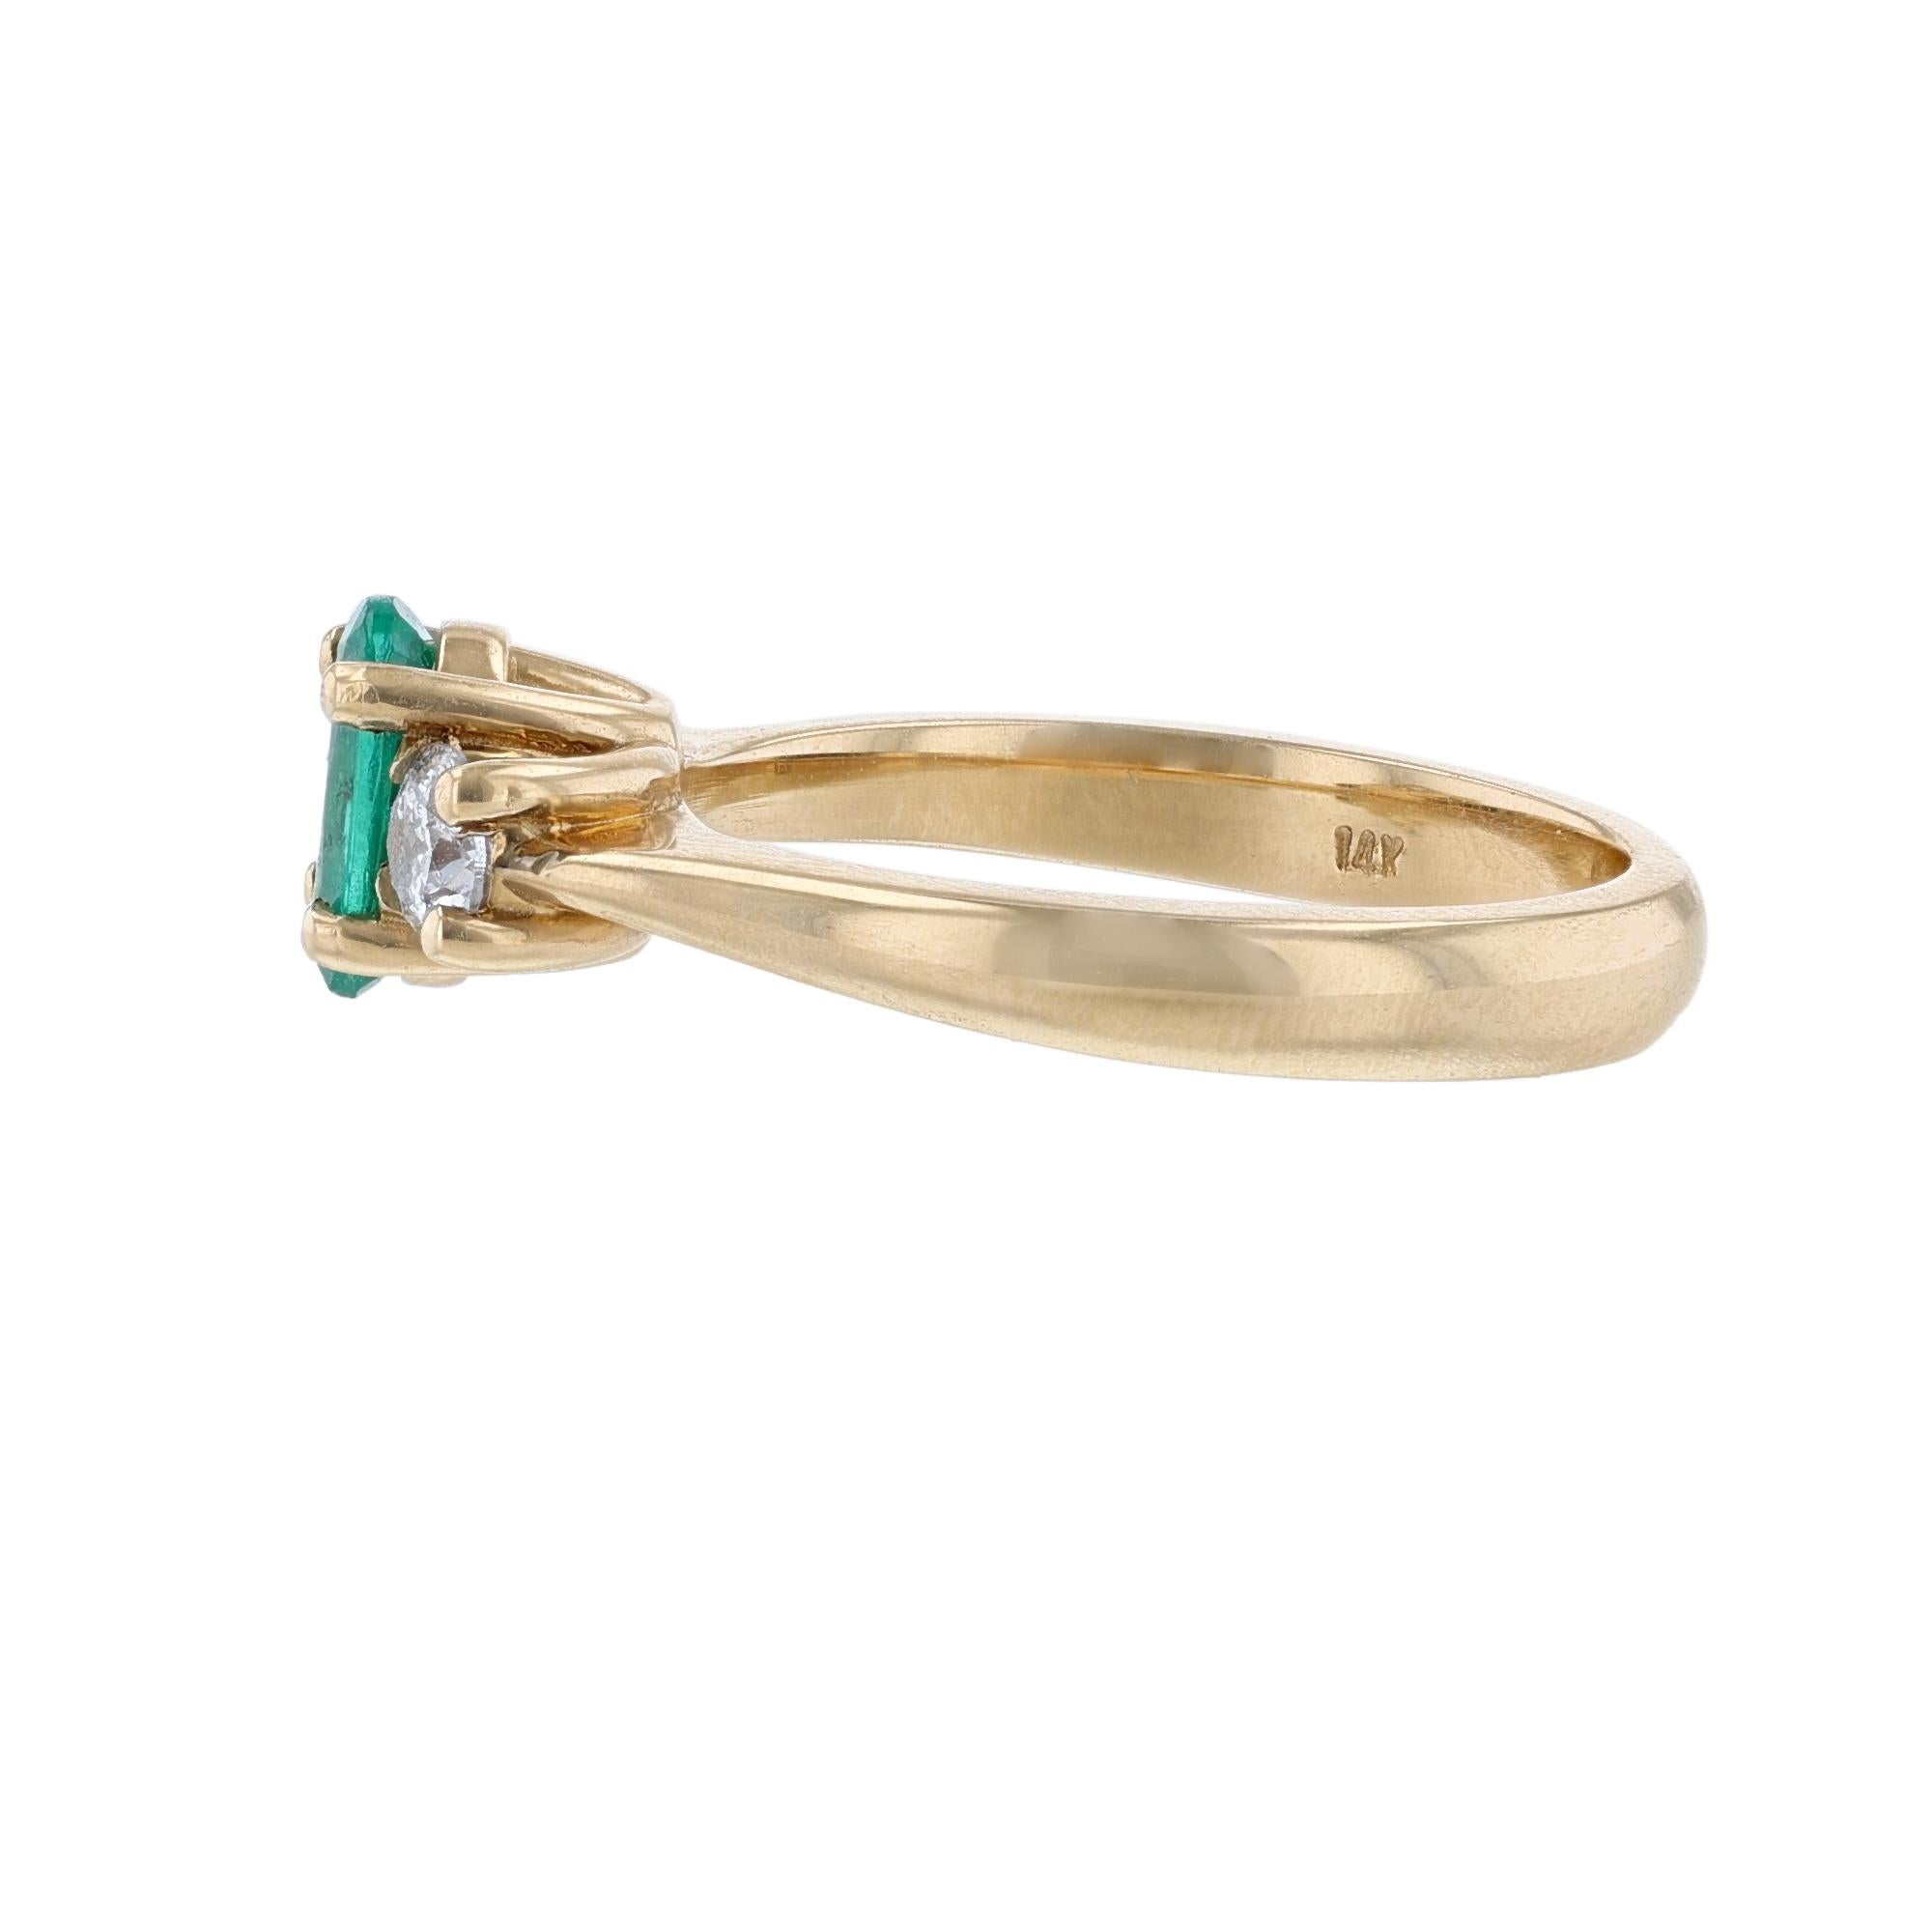 This ring is made in 14k yellow gold. It features an oval cut emerald as the middle stone weighing 0.67ct. The ring also features 2 prong set, round cut diamonds weighing 0.42cts. With a color grade (H) and clarity grade (SI2).